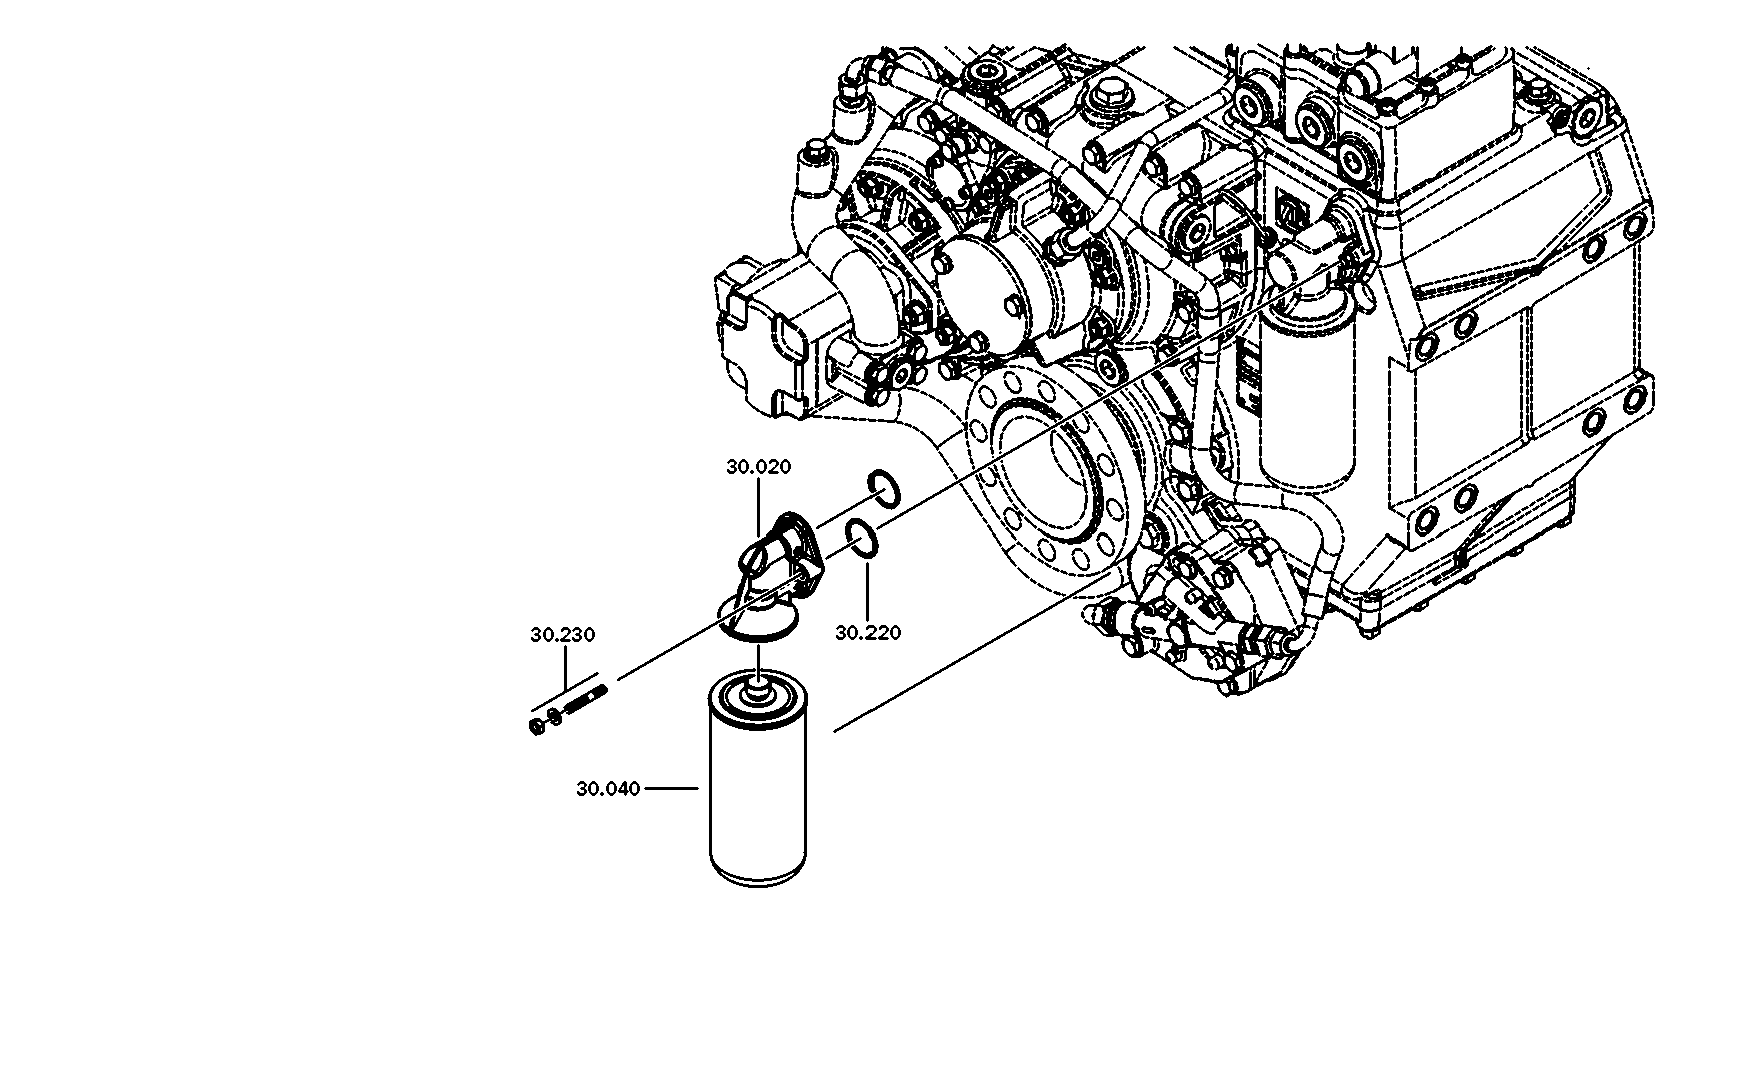 drawing for PPM 6089128 - FILTER HEAD (figure 2)